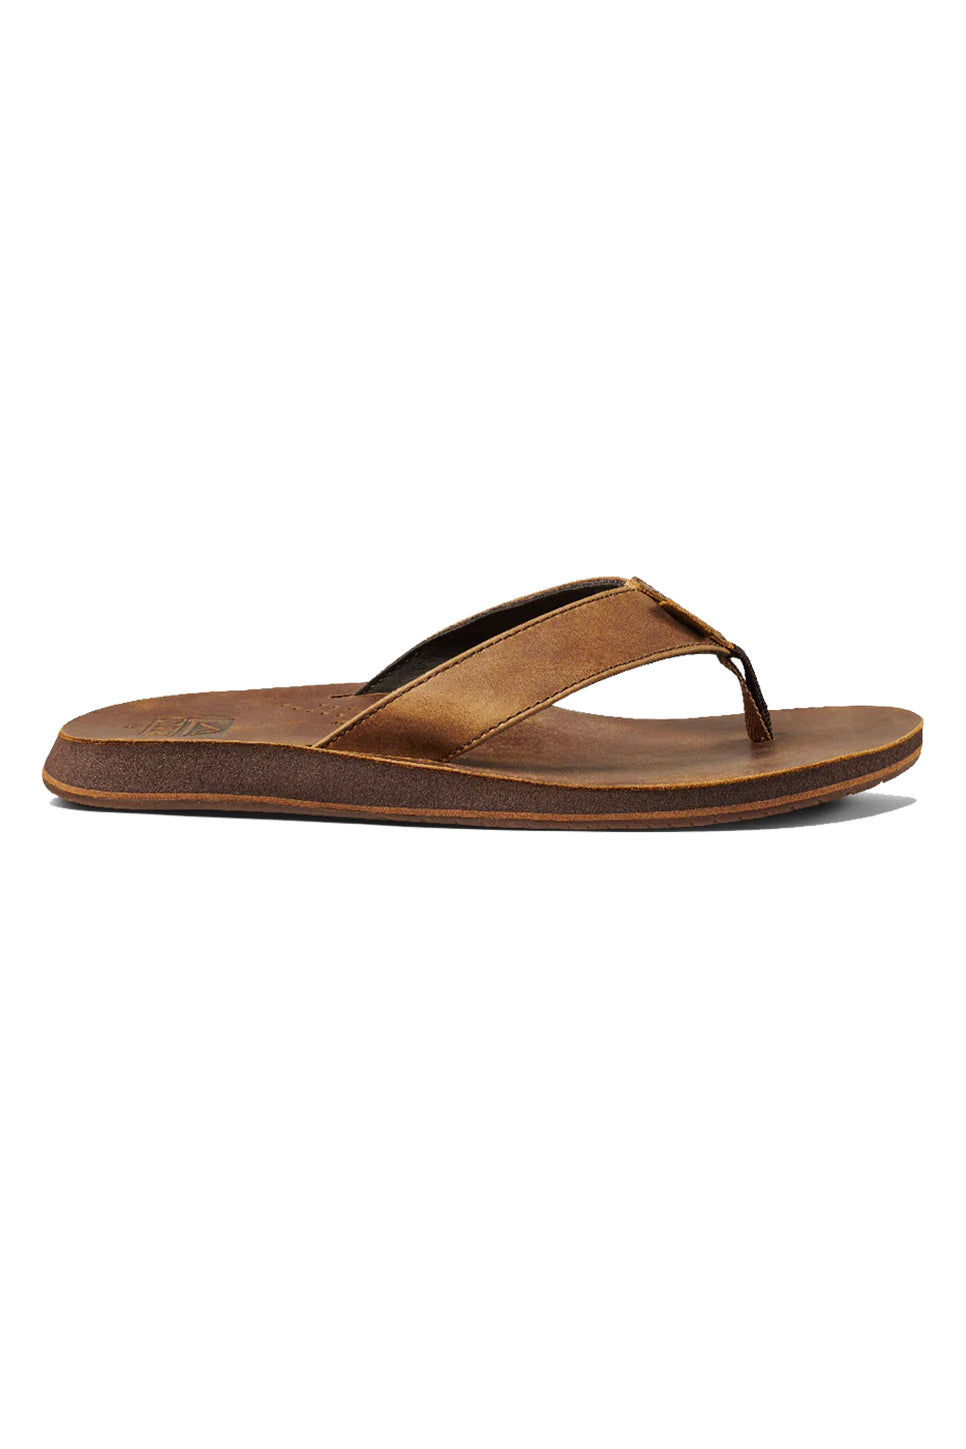 Reef - Drift Classic - Brown - Side